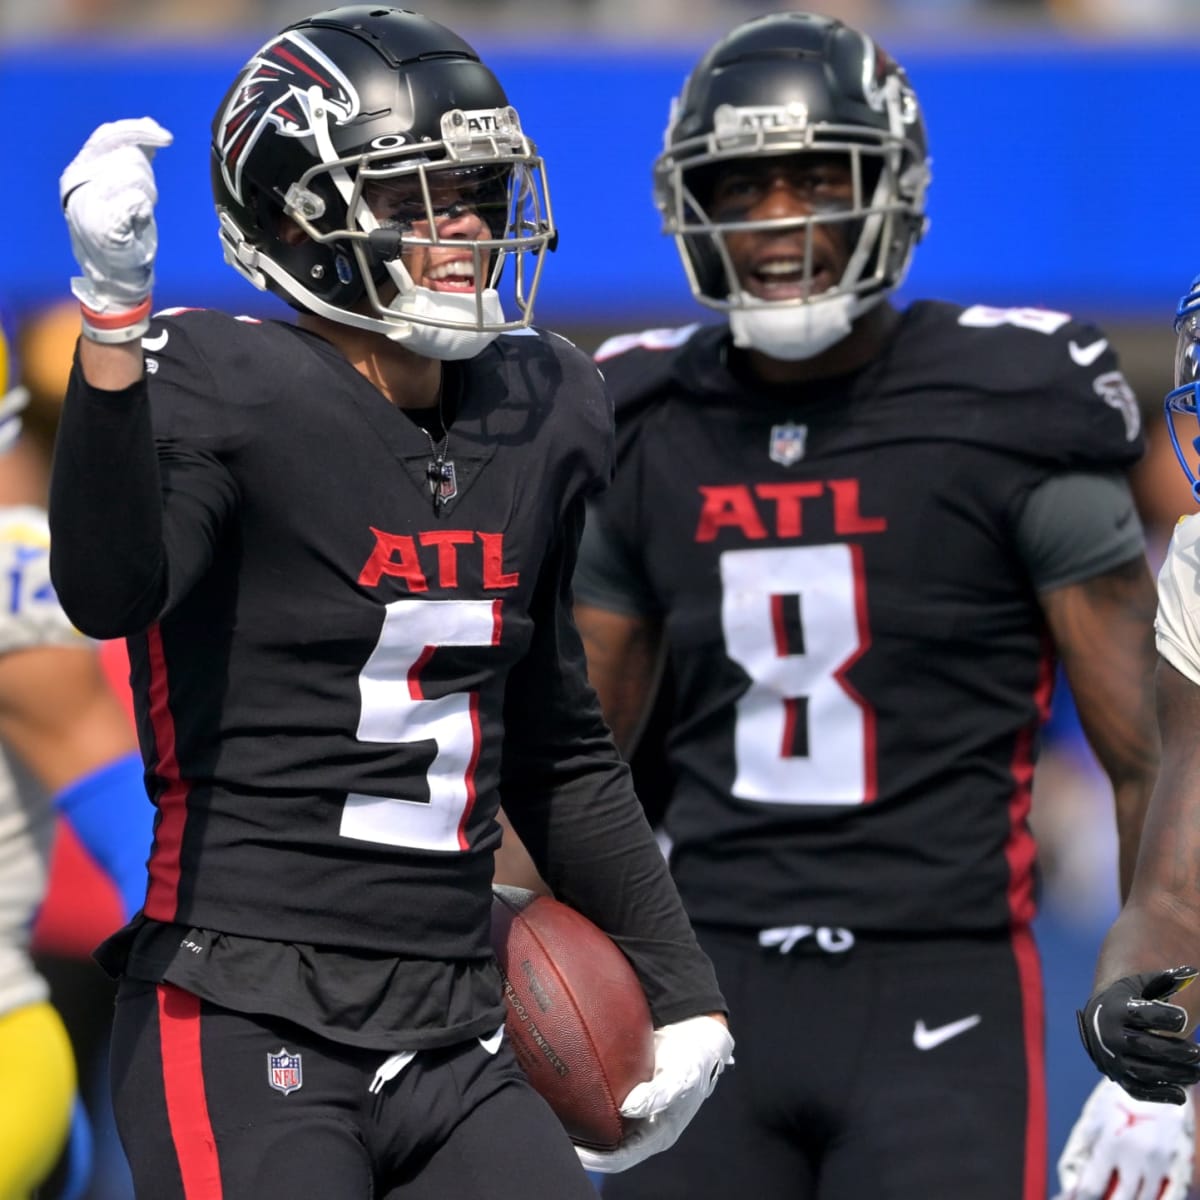 Atlanta Falcons Uniforms Ranked Last: 'One of the Worst the NFL Has Ever  Seen' - Sports Illustrated Atlanta Falcons News, Analysis and More